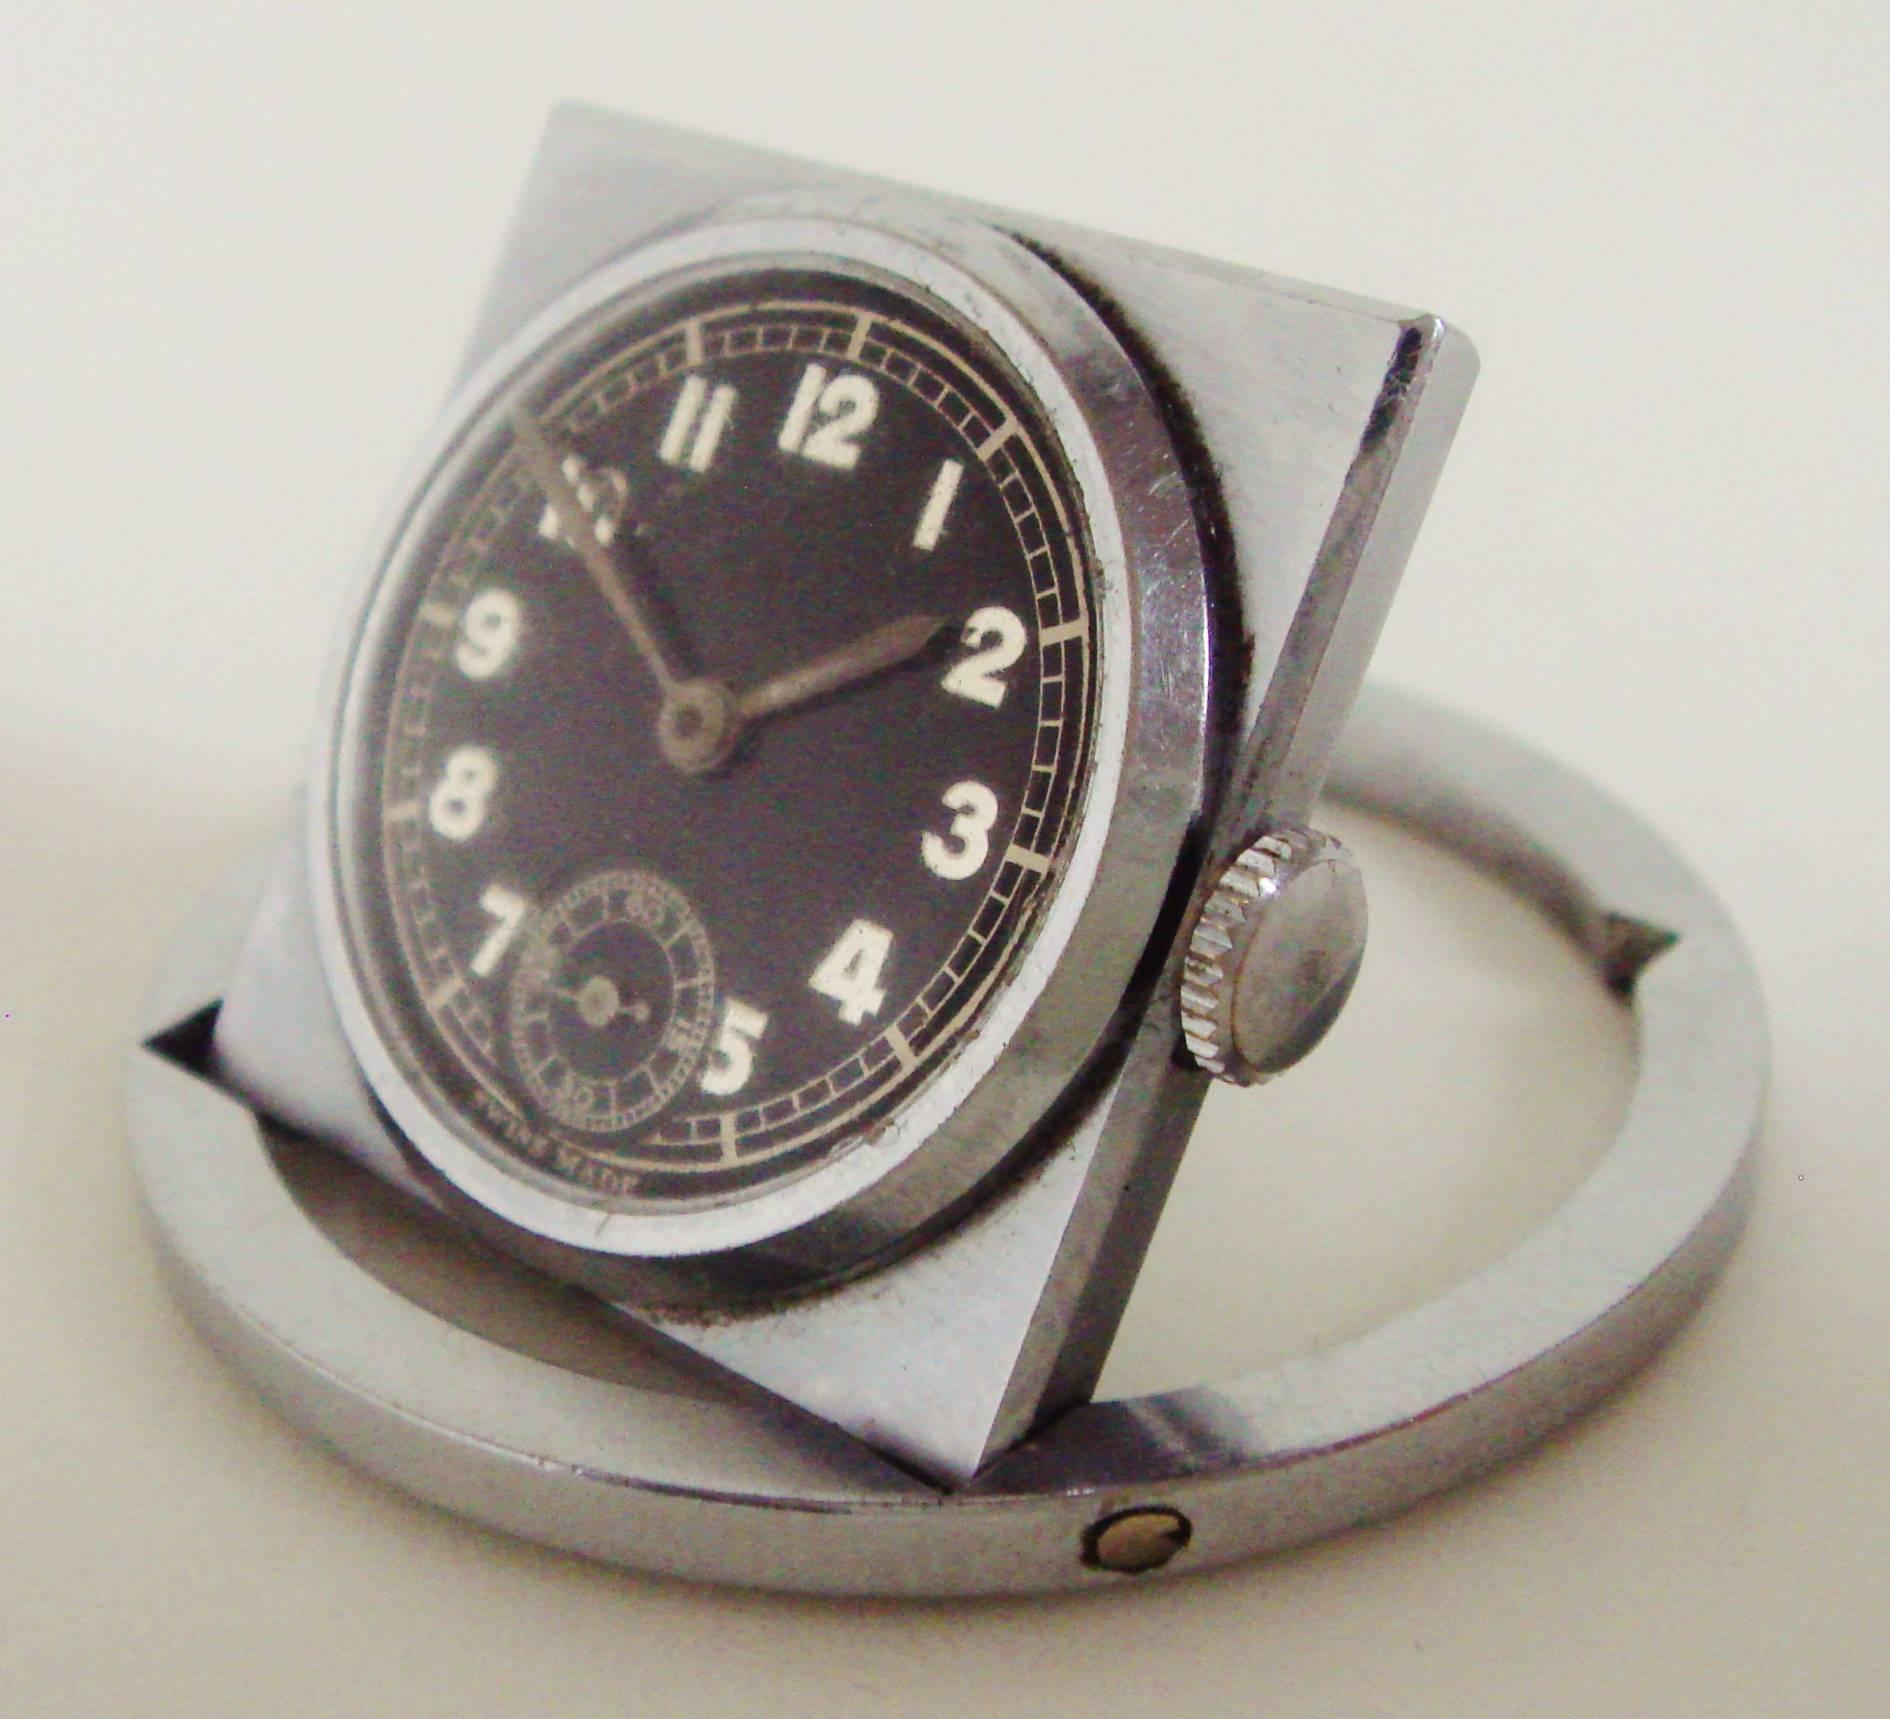 This functional Swiss Art Deco chrome/steel folding traveling watch can be used as both a bedside/desk clock and a pocket watch. Its stylish tilting geometric design is a triumph of simplicity, it is working well and save for a scratched owners name